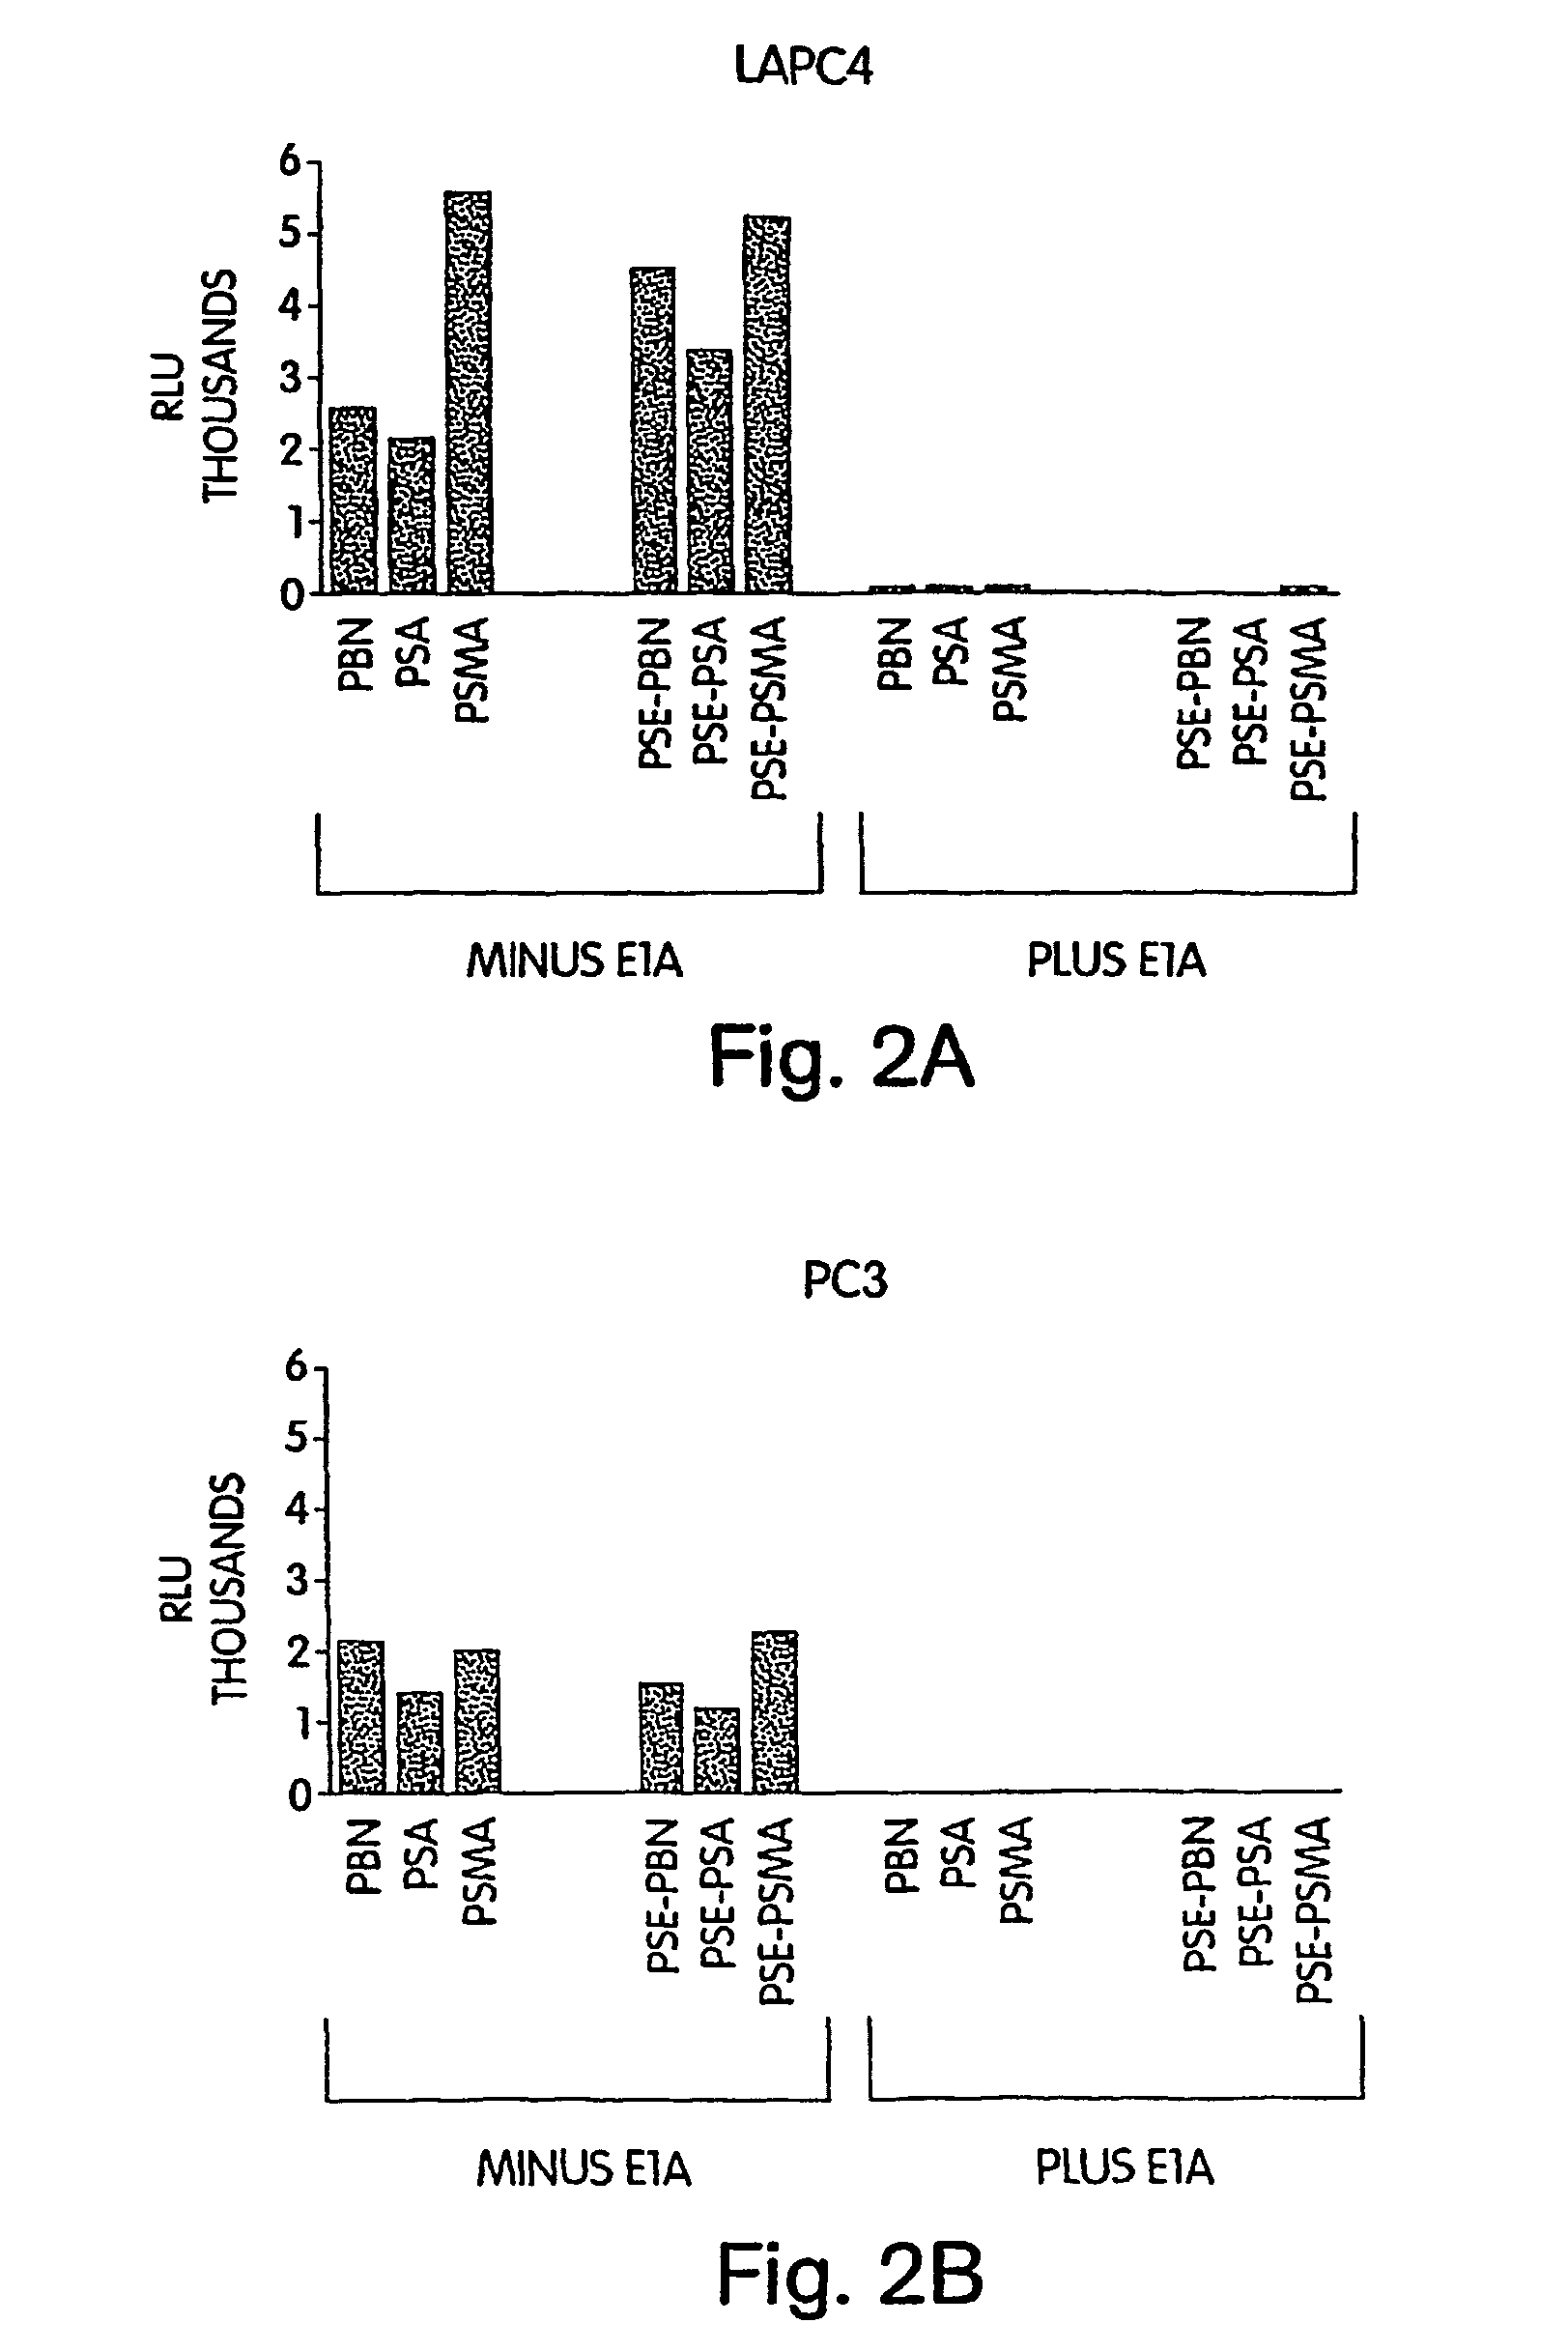 Enhancement of adenoviral oncolytic activity by modification of the E1A gene product